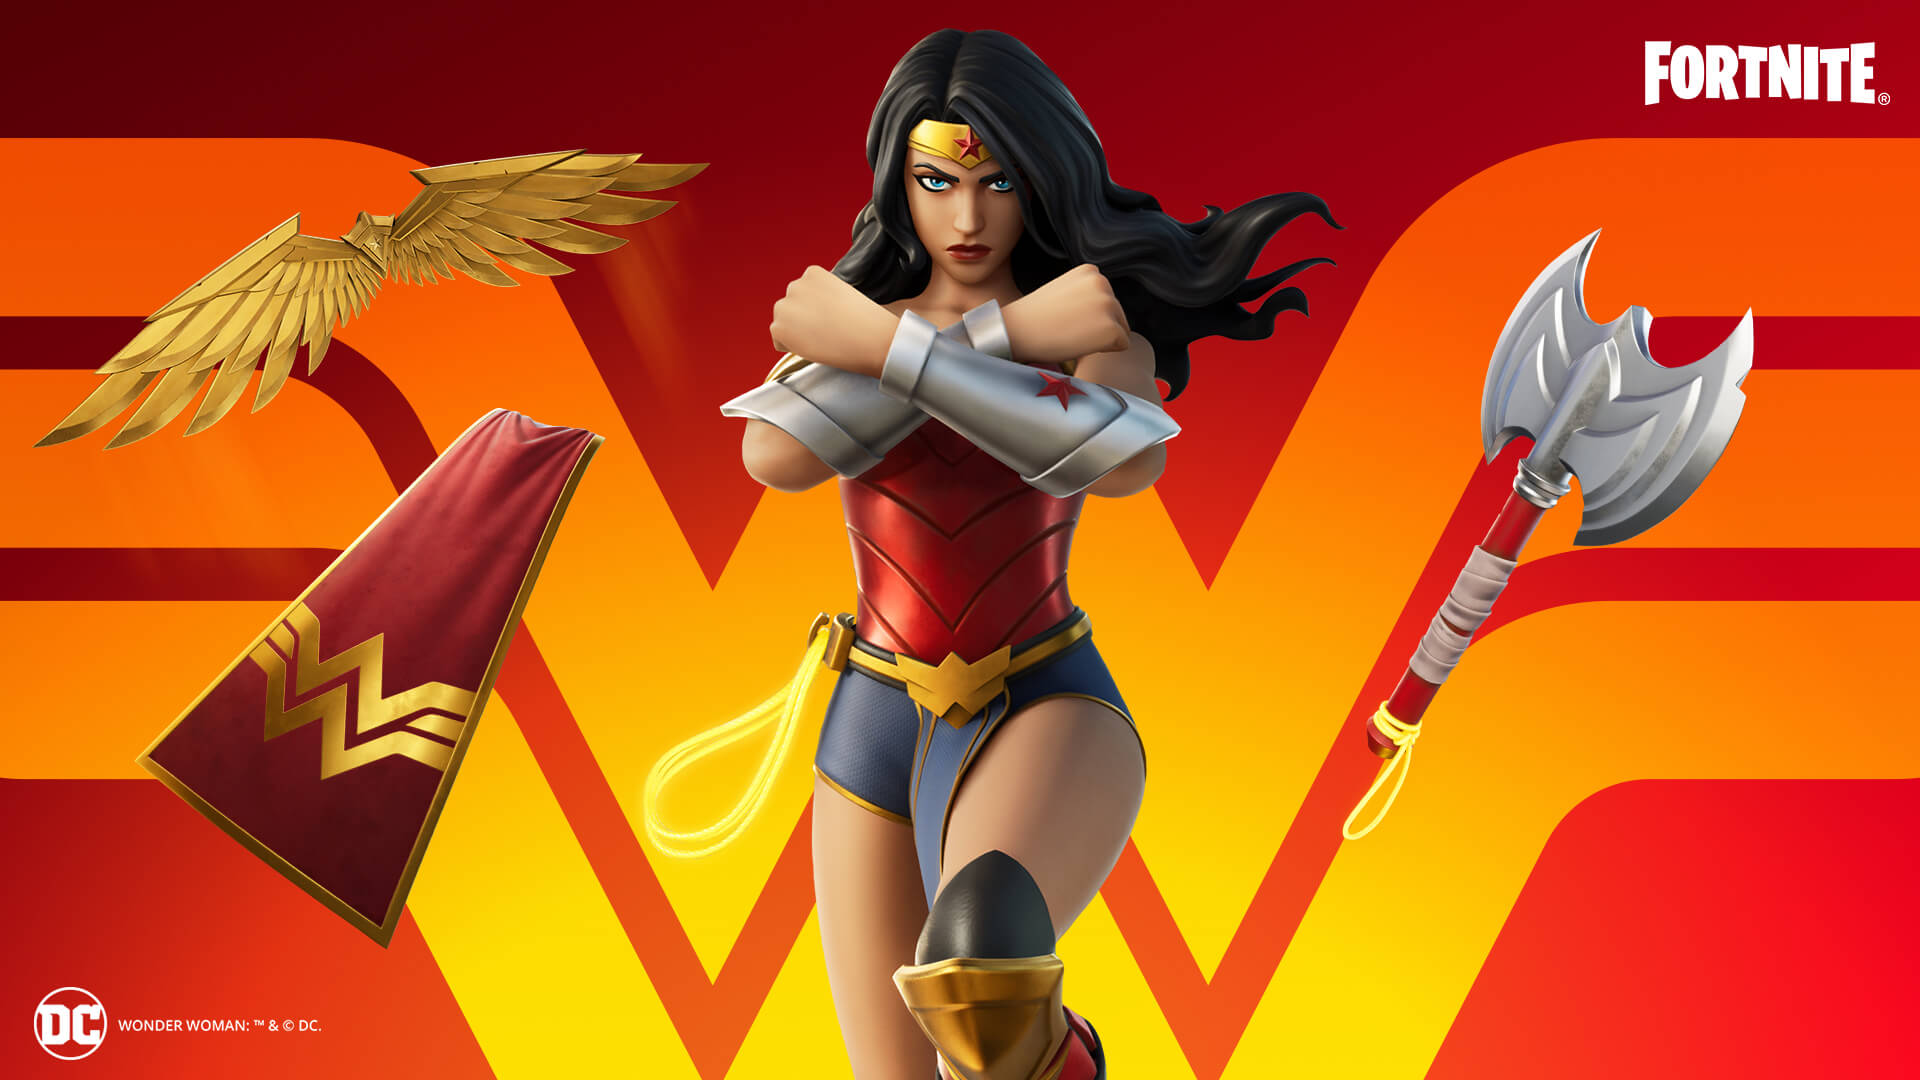 DC's Wonder Woman is coming to Fortnite with a new Cup